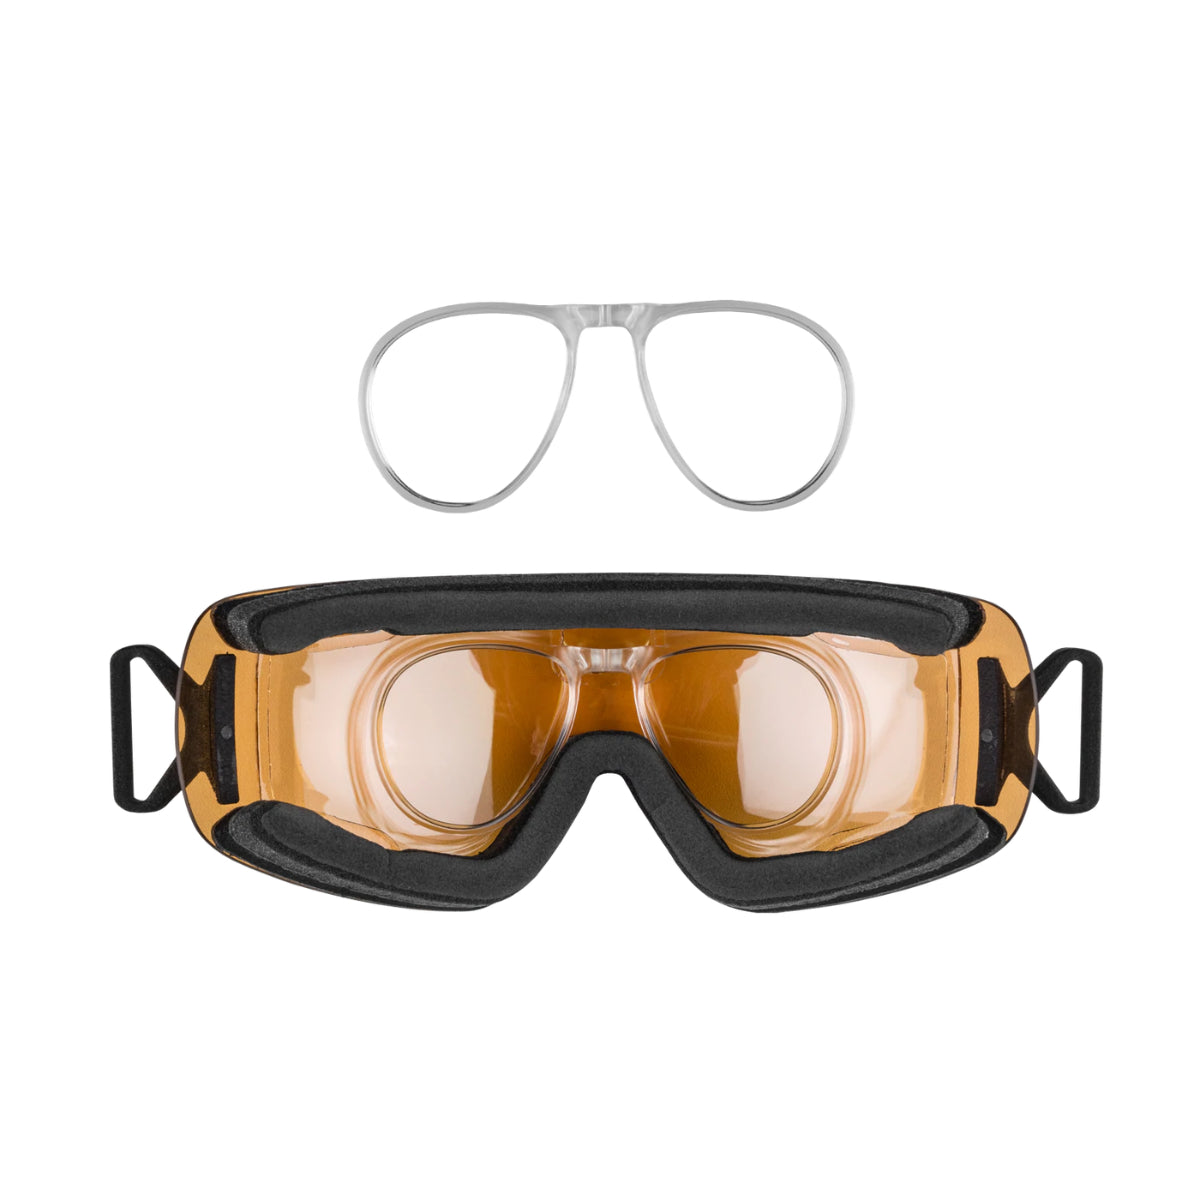 Grivel Ice Goggles, for glasses